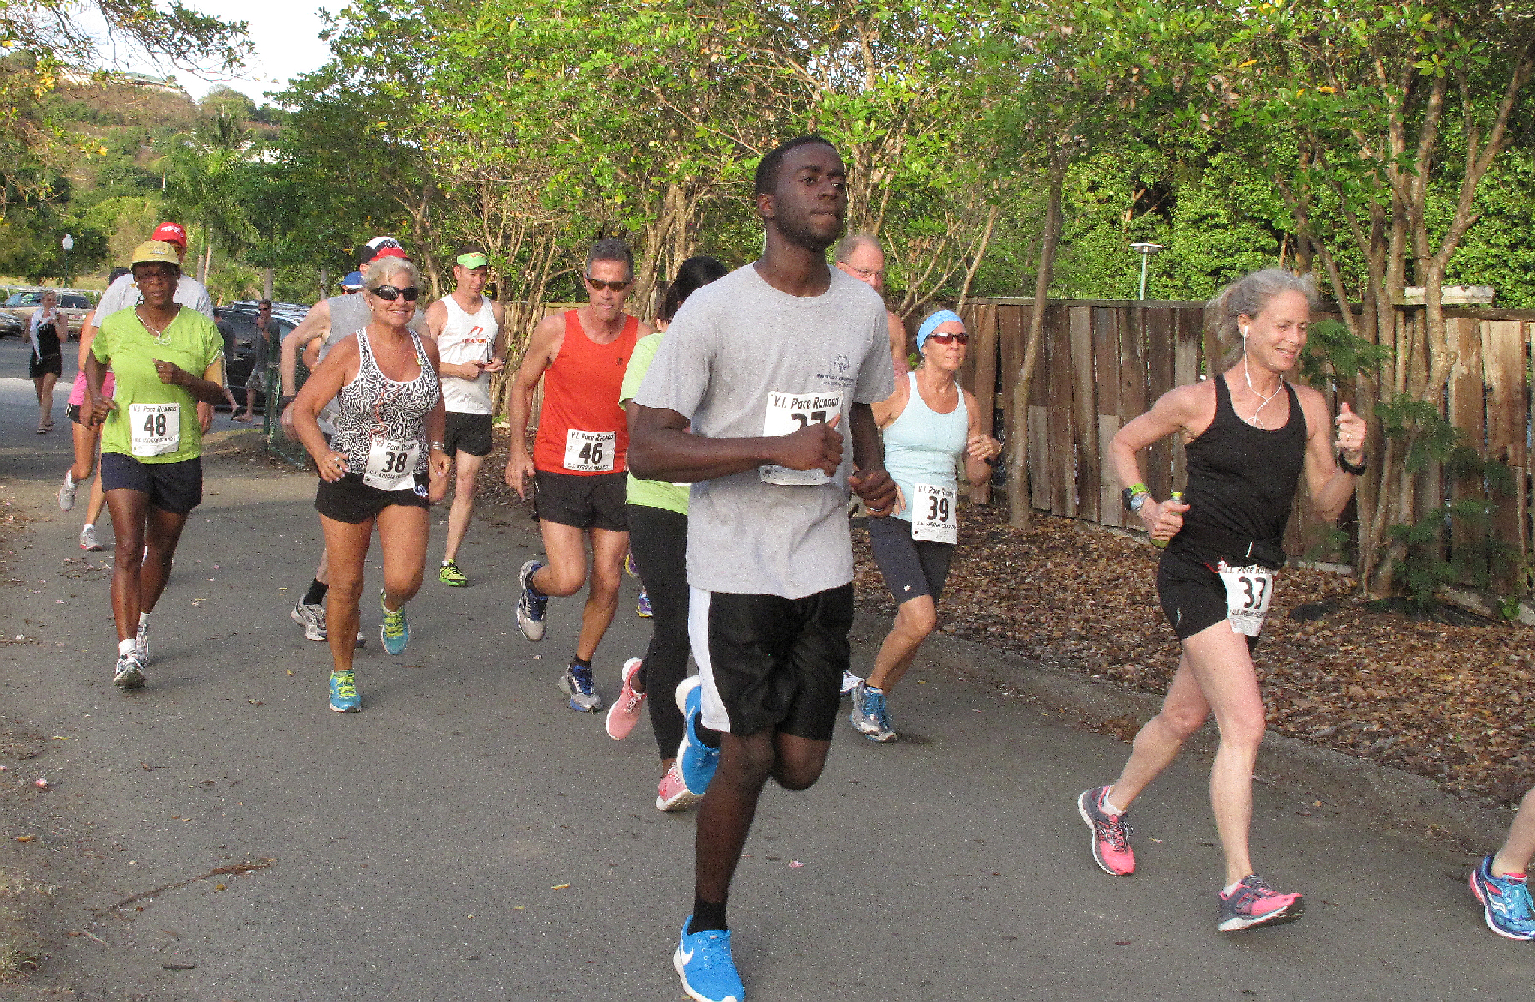 The Paradise 5K Road Race was organized bythe Virgin Islands Pace Runners